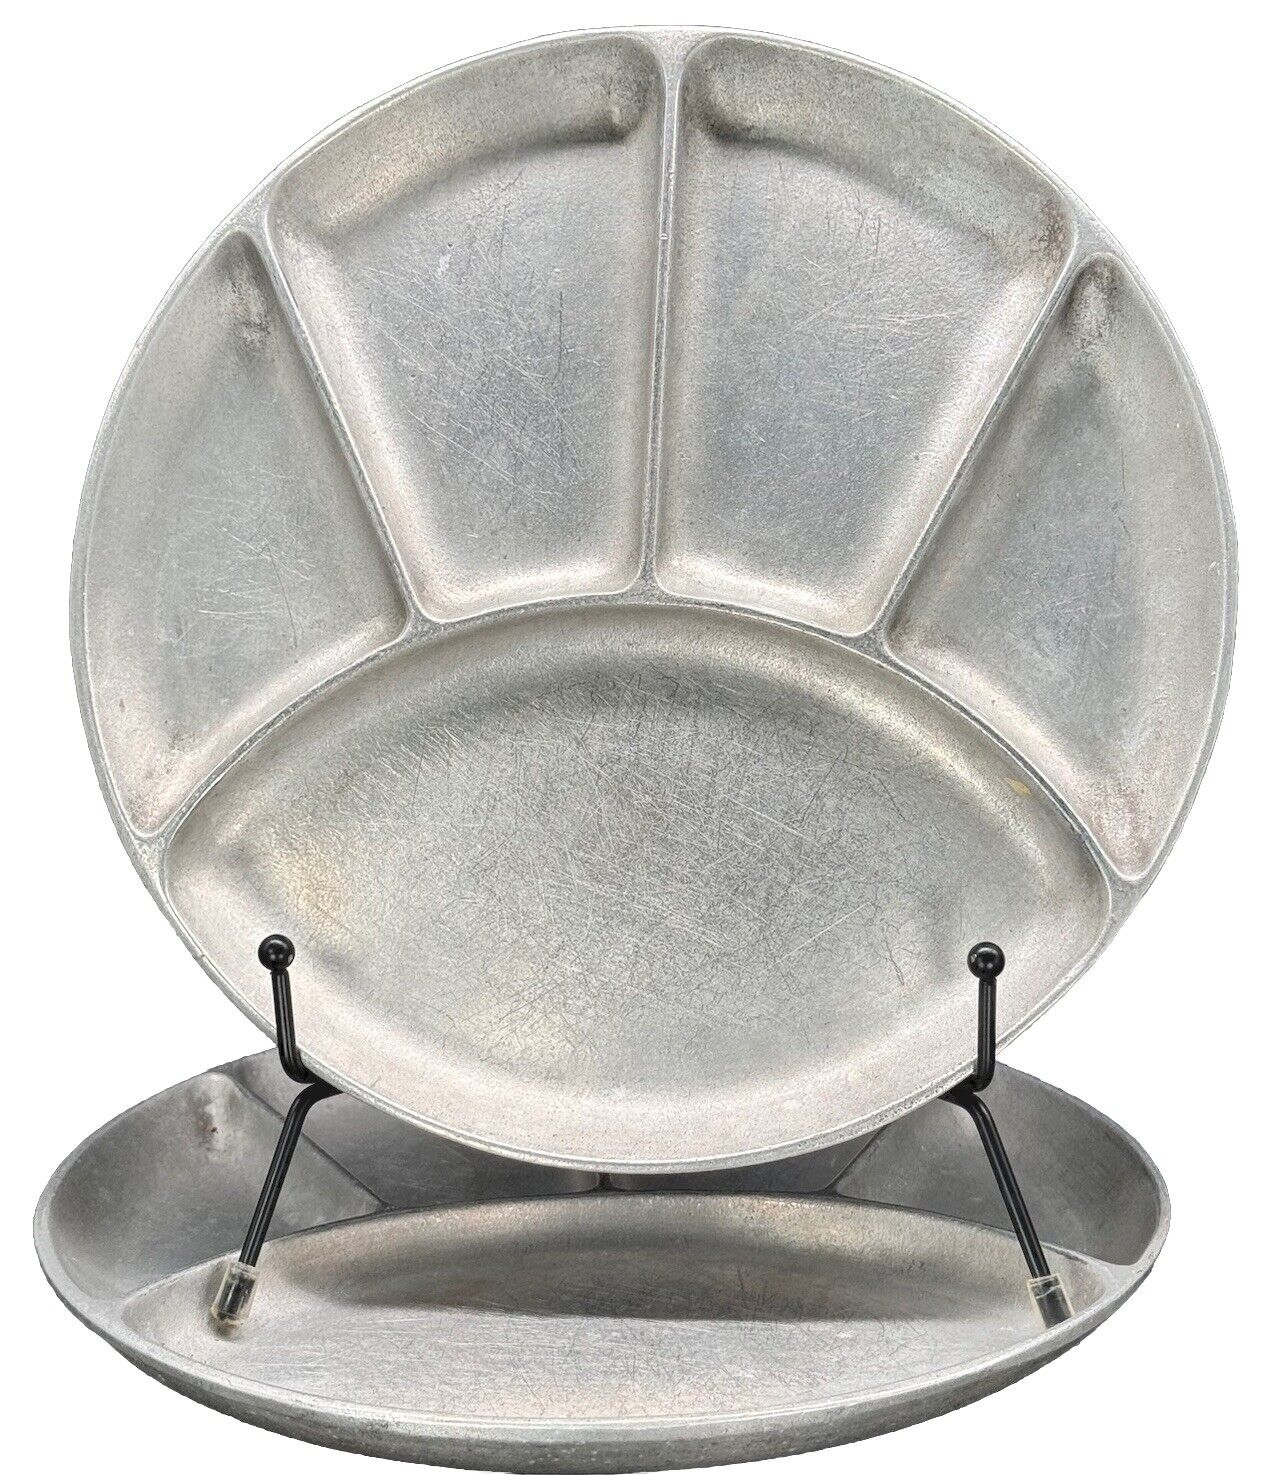 2 Bon Chef 5 Section Fondue Divided Plate Pewter Armetale Vintage 9011-N Sushi